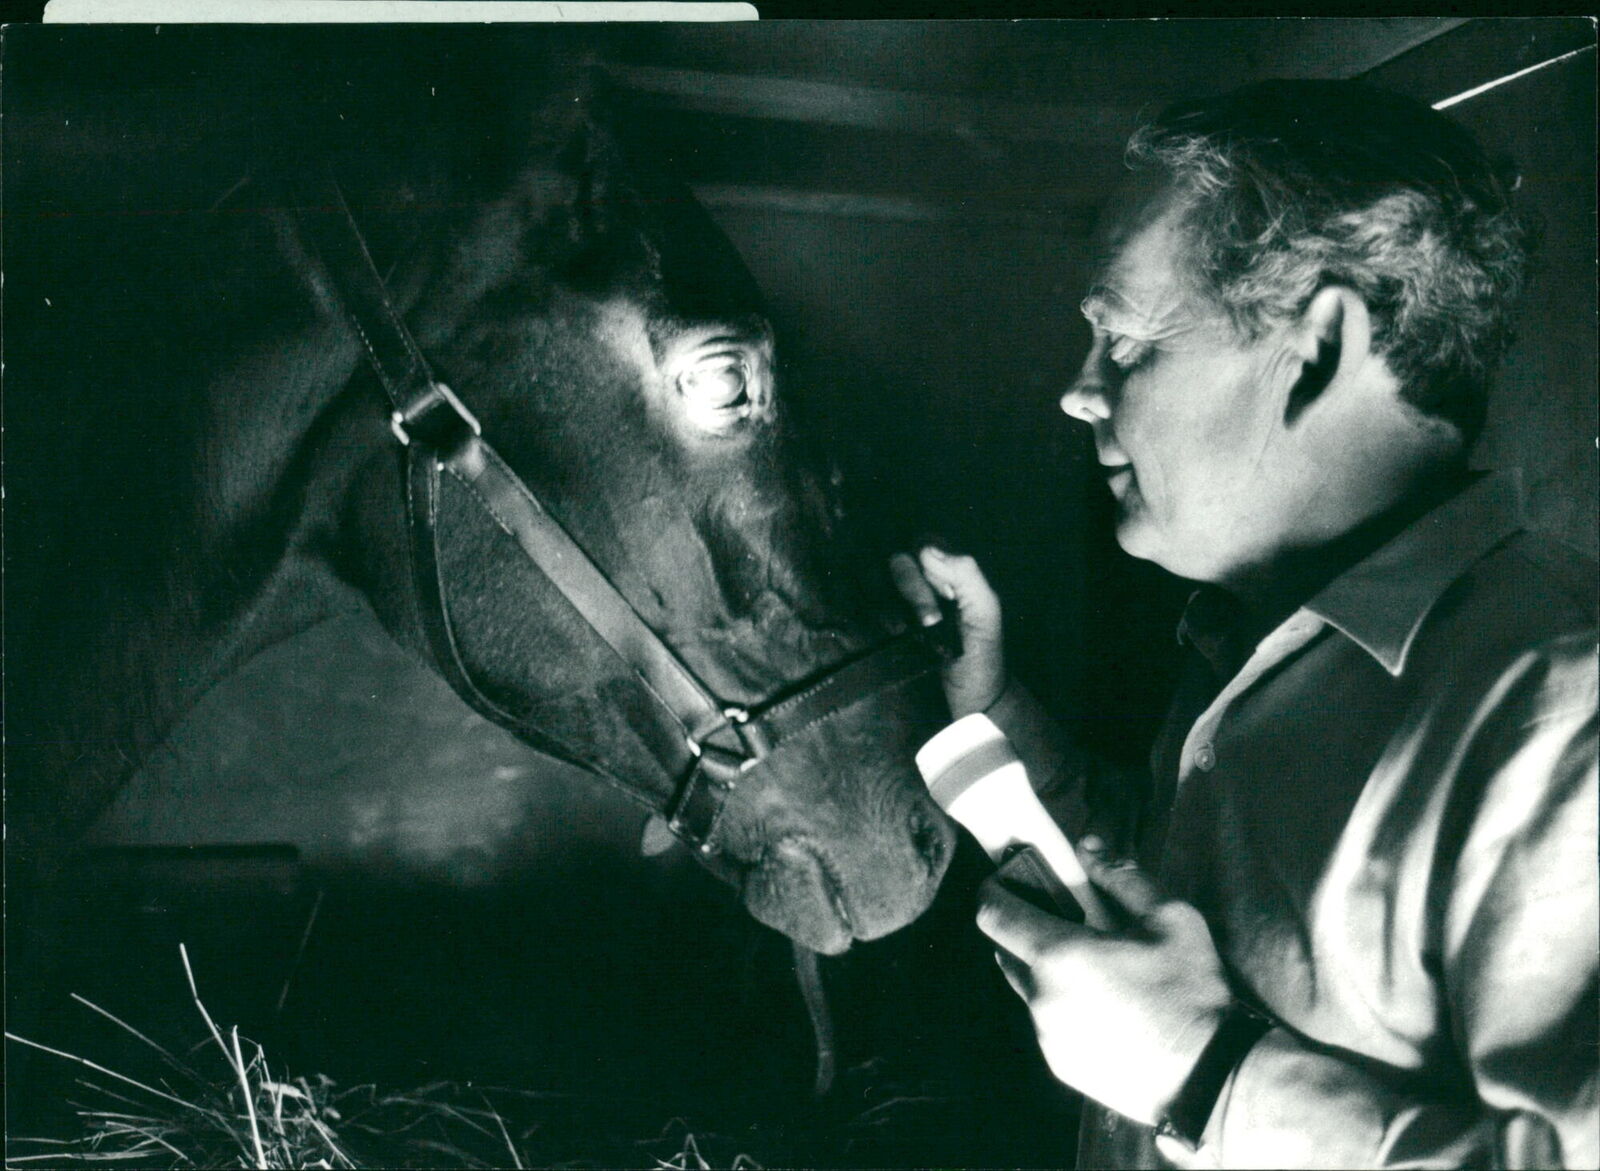 The doctor checks out the competition stallion... - Vintage Photograph 2322487